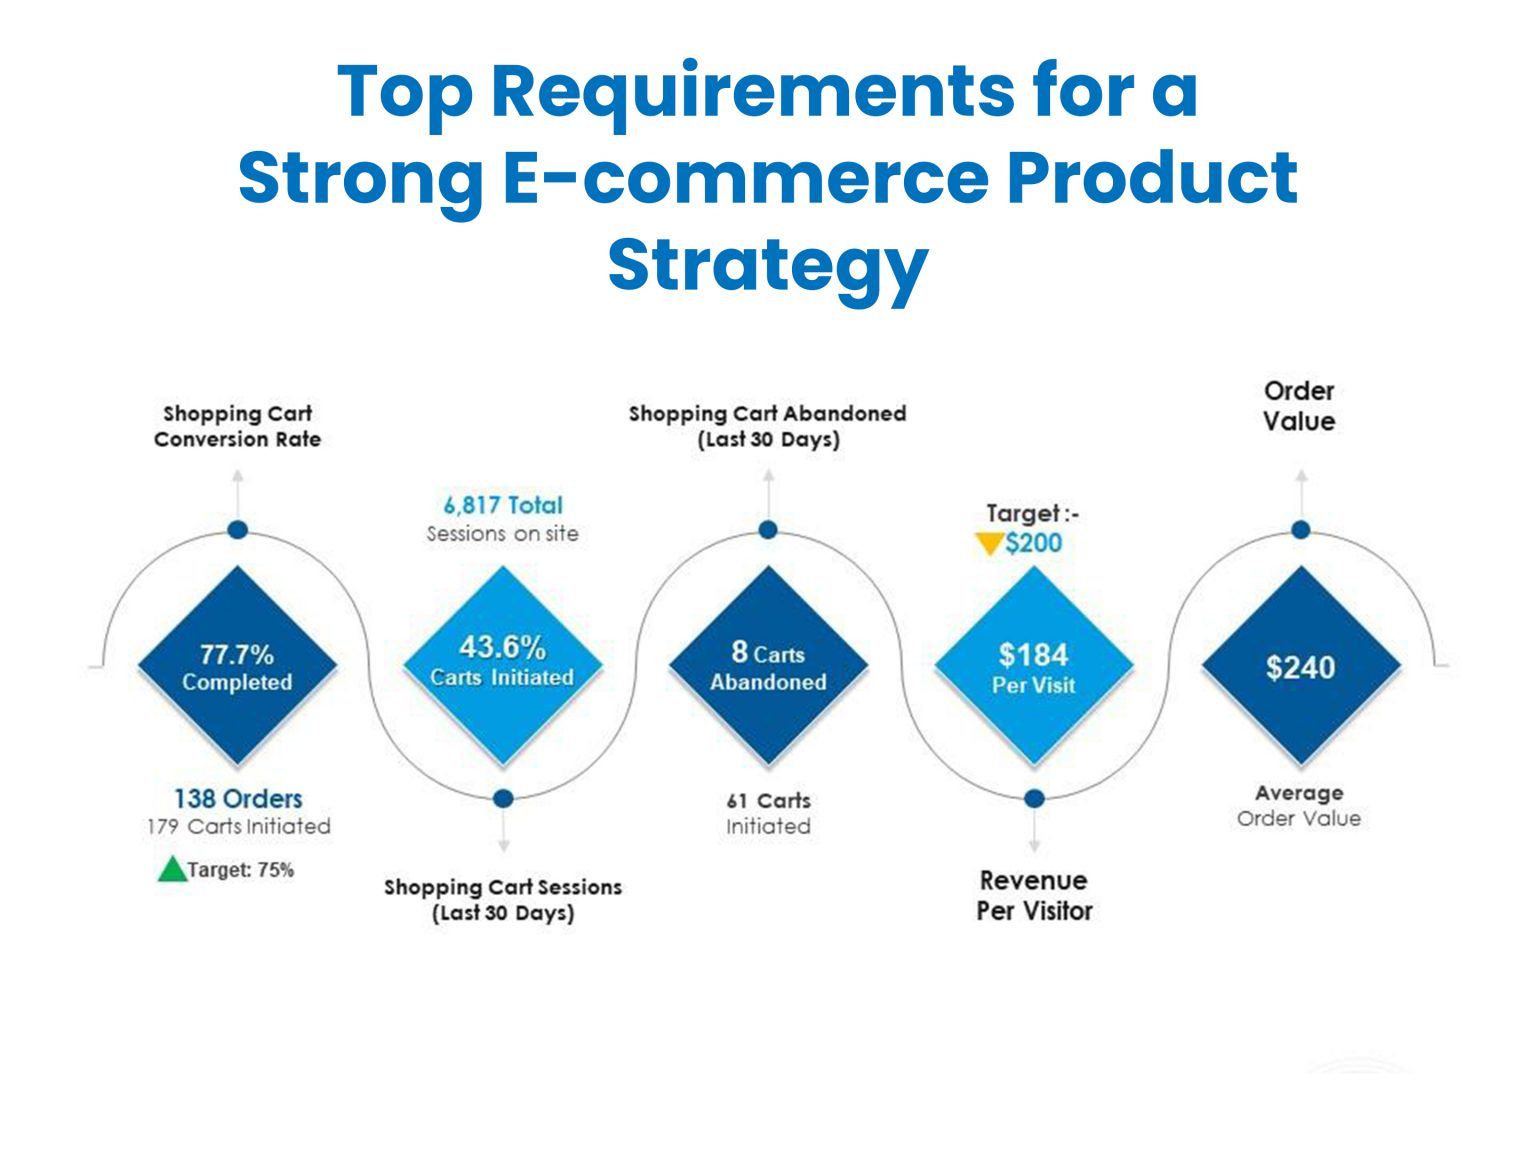 E-commerce Product Strategy